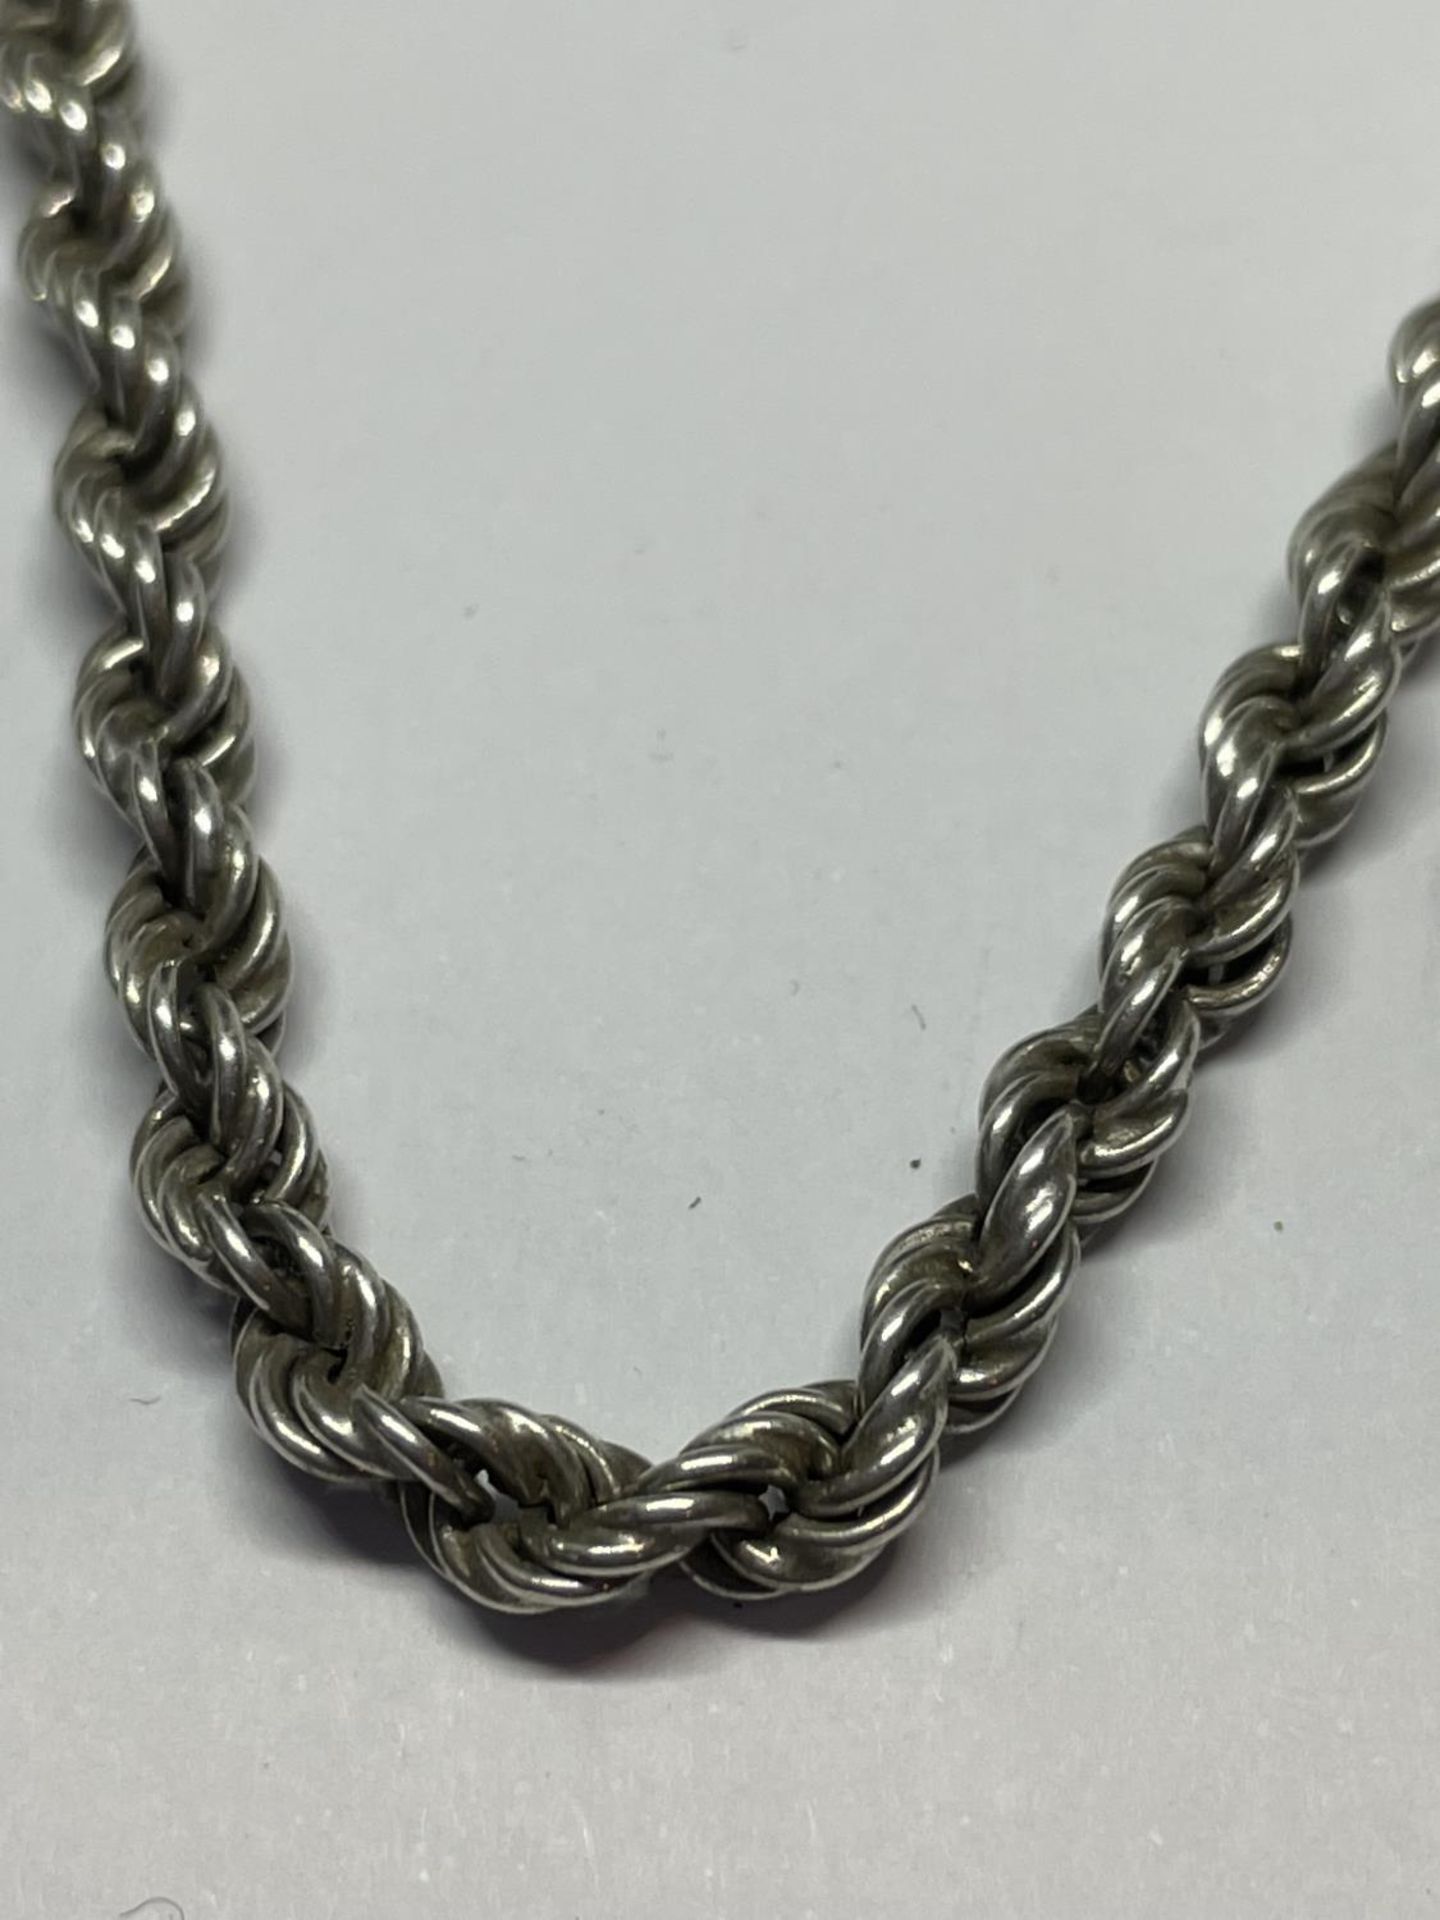 A MARKED SILVER ROPE NECKLACE 60 CM LONG - Image 2 of 3